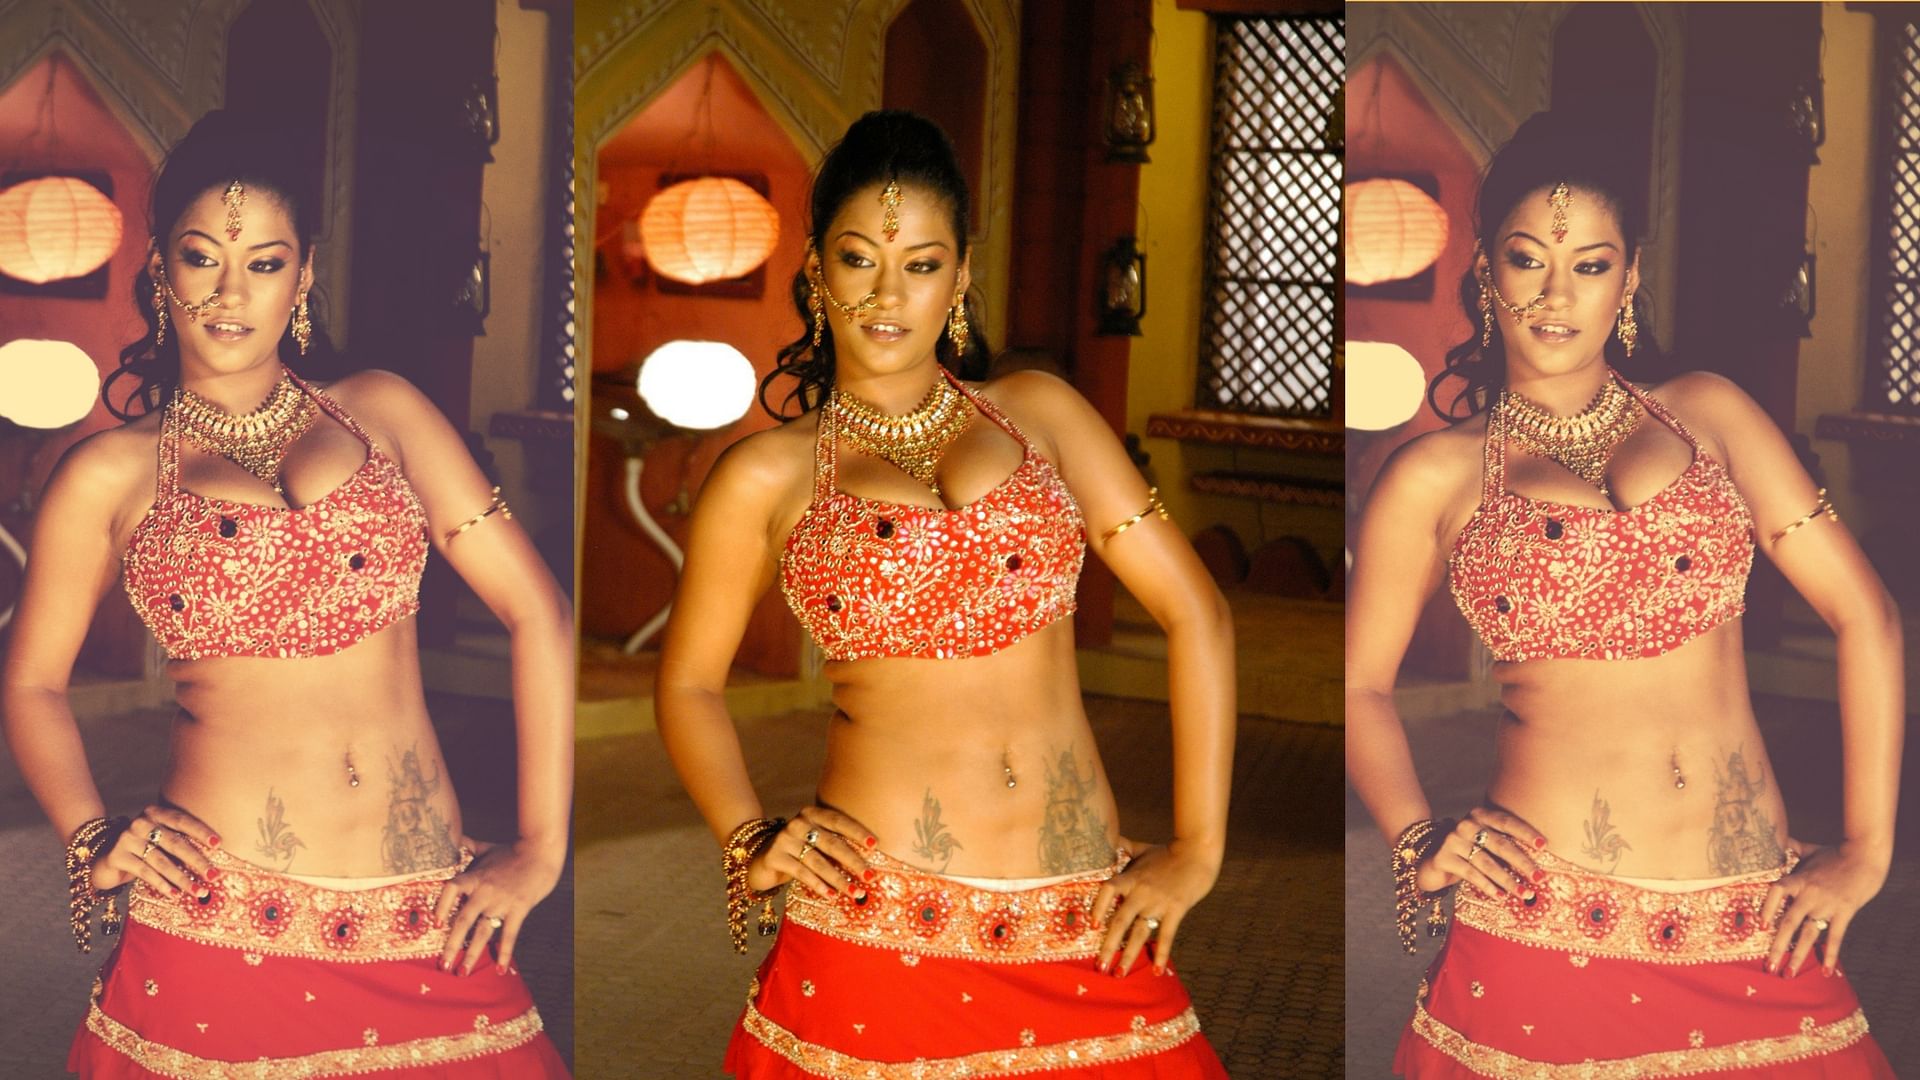 Mumith Khanxnxx - Mumaith Khan to Exit 'Bigg Boss' For Questioning In Drug Case